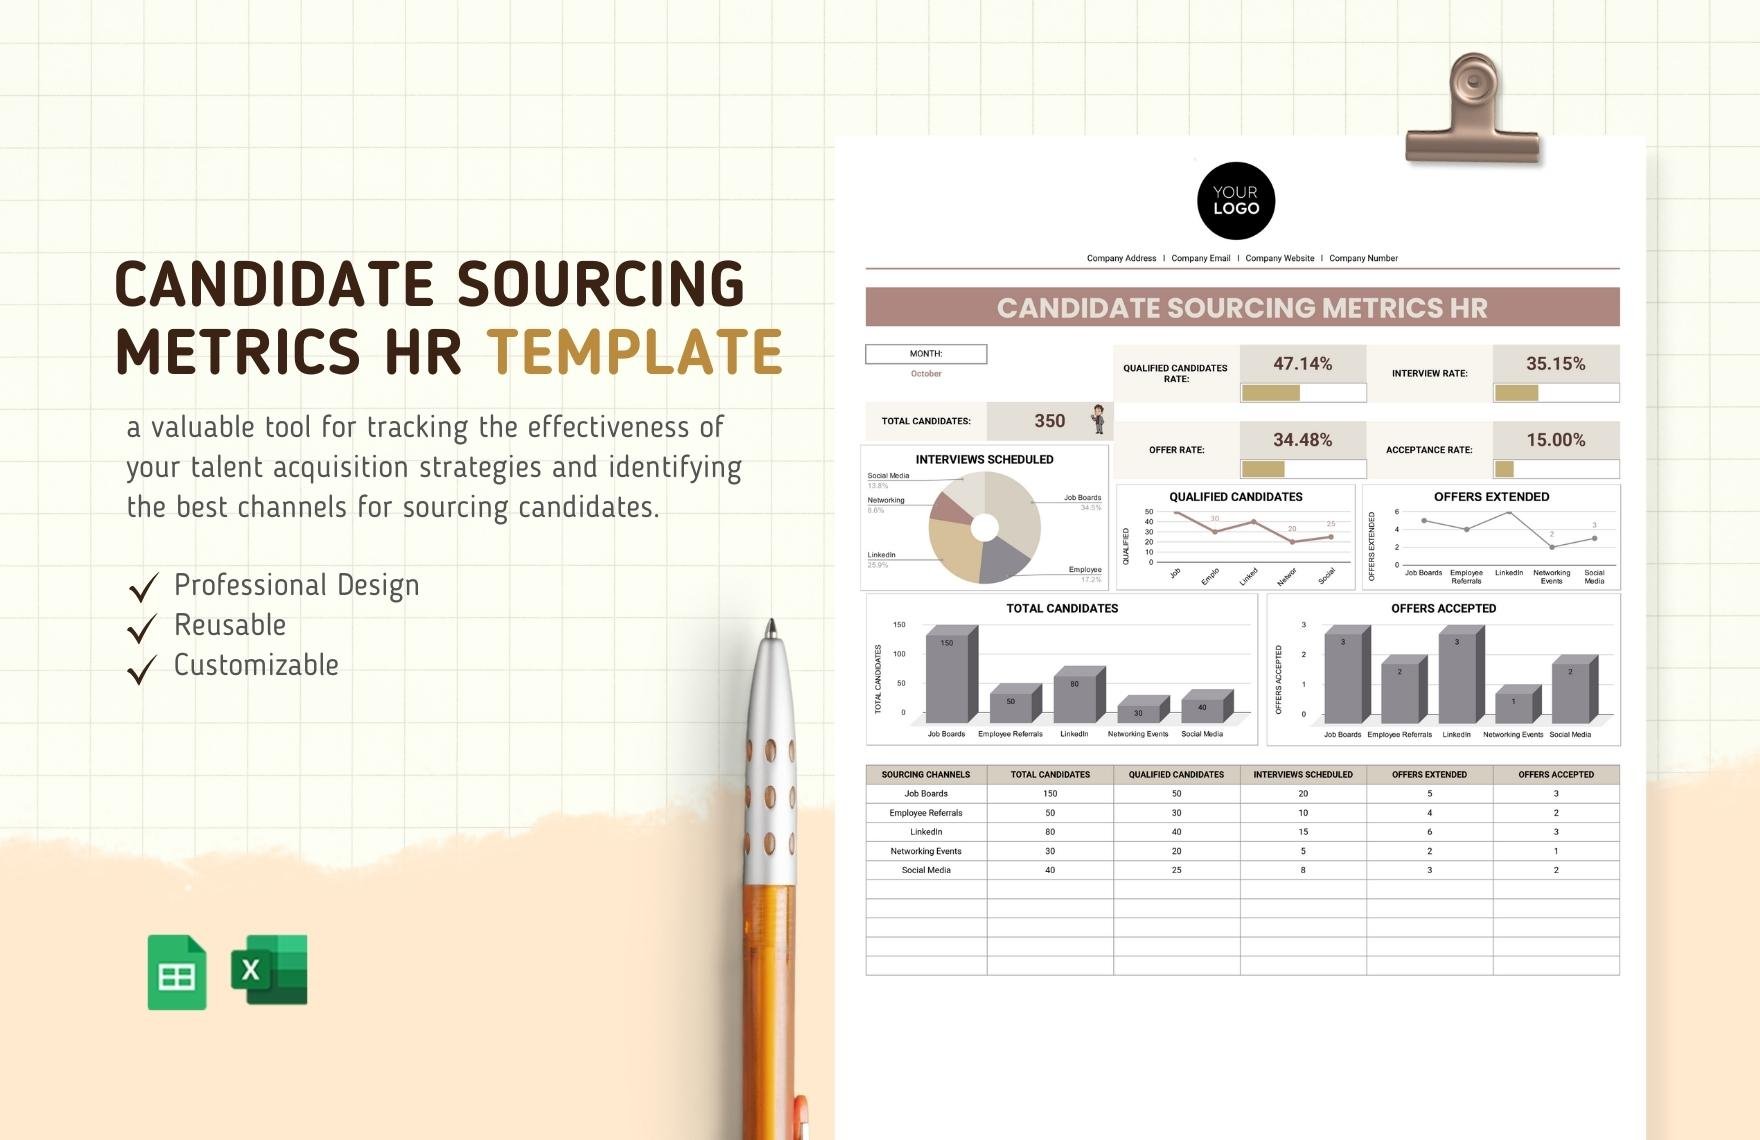 Candidate Sourcing Metrics HR Template